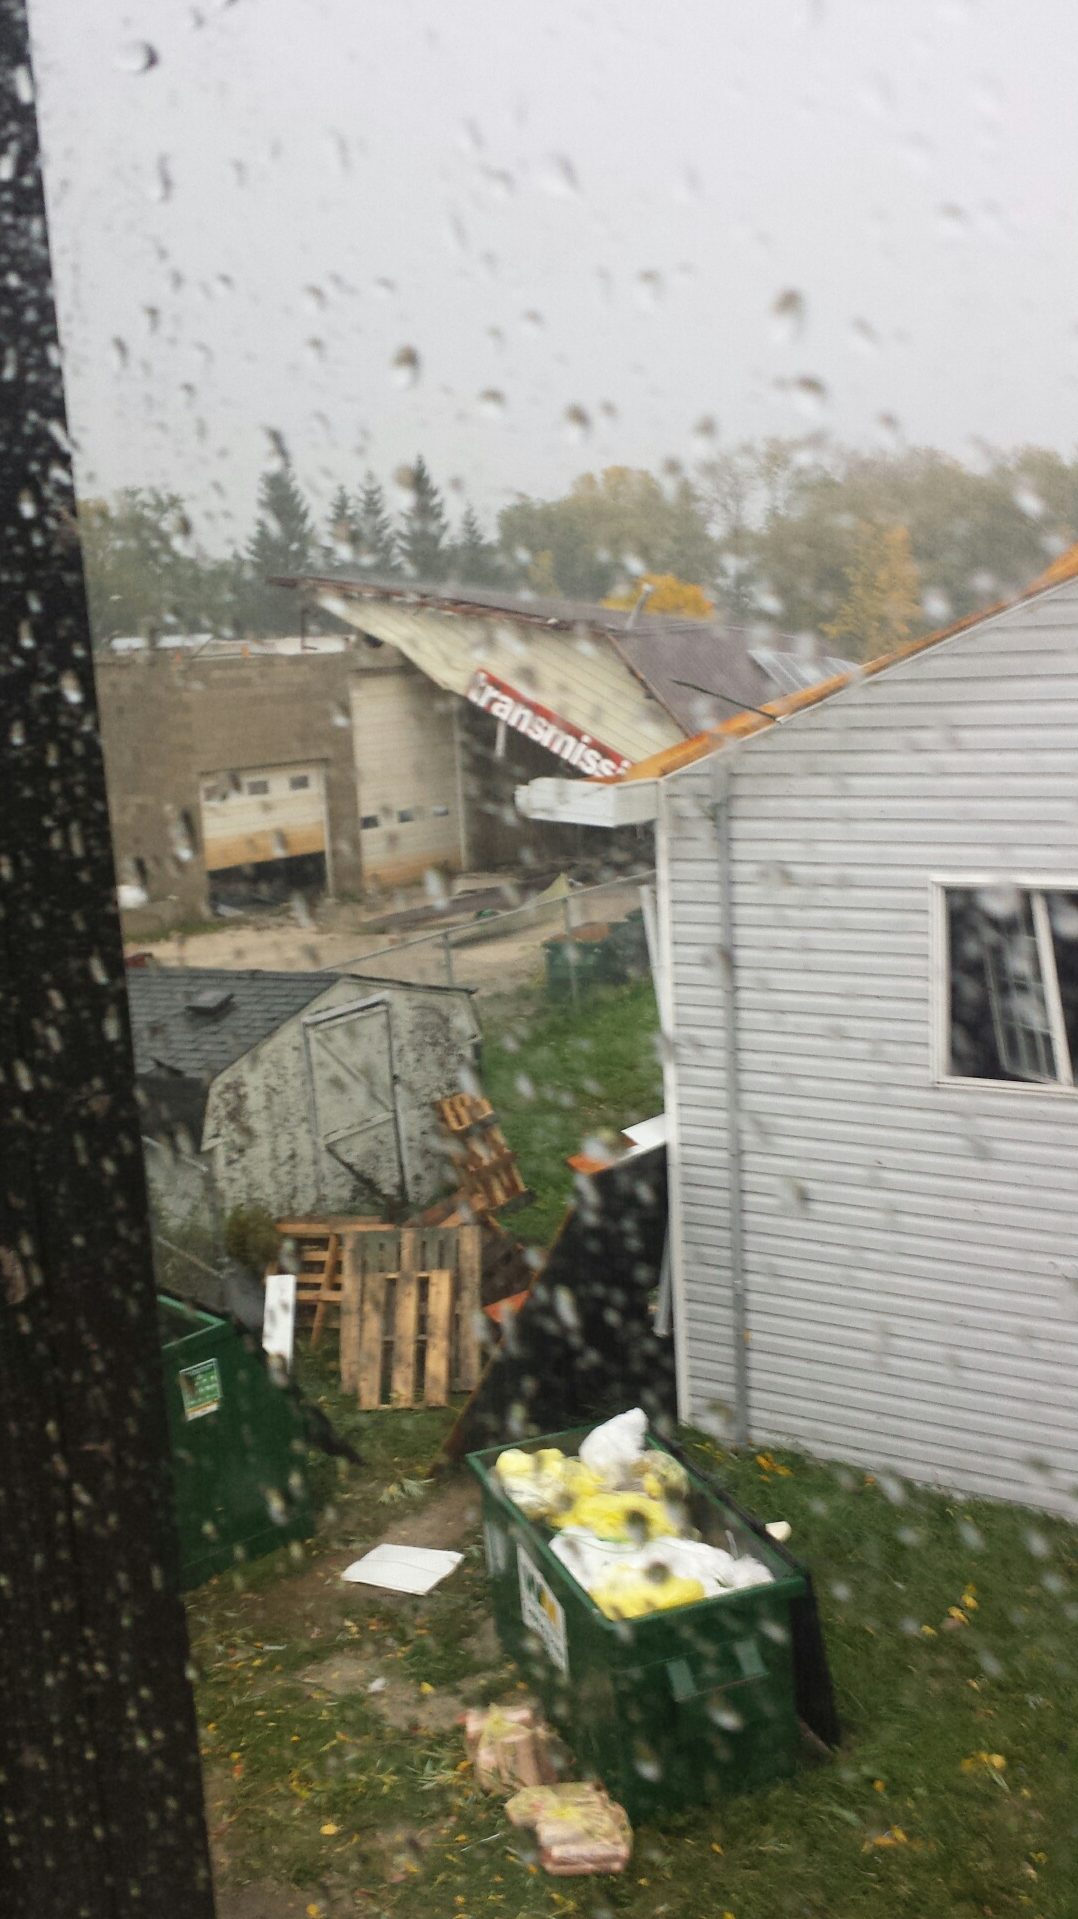 Major storm causes severe damage in Collingwood - 570 News